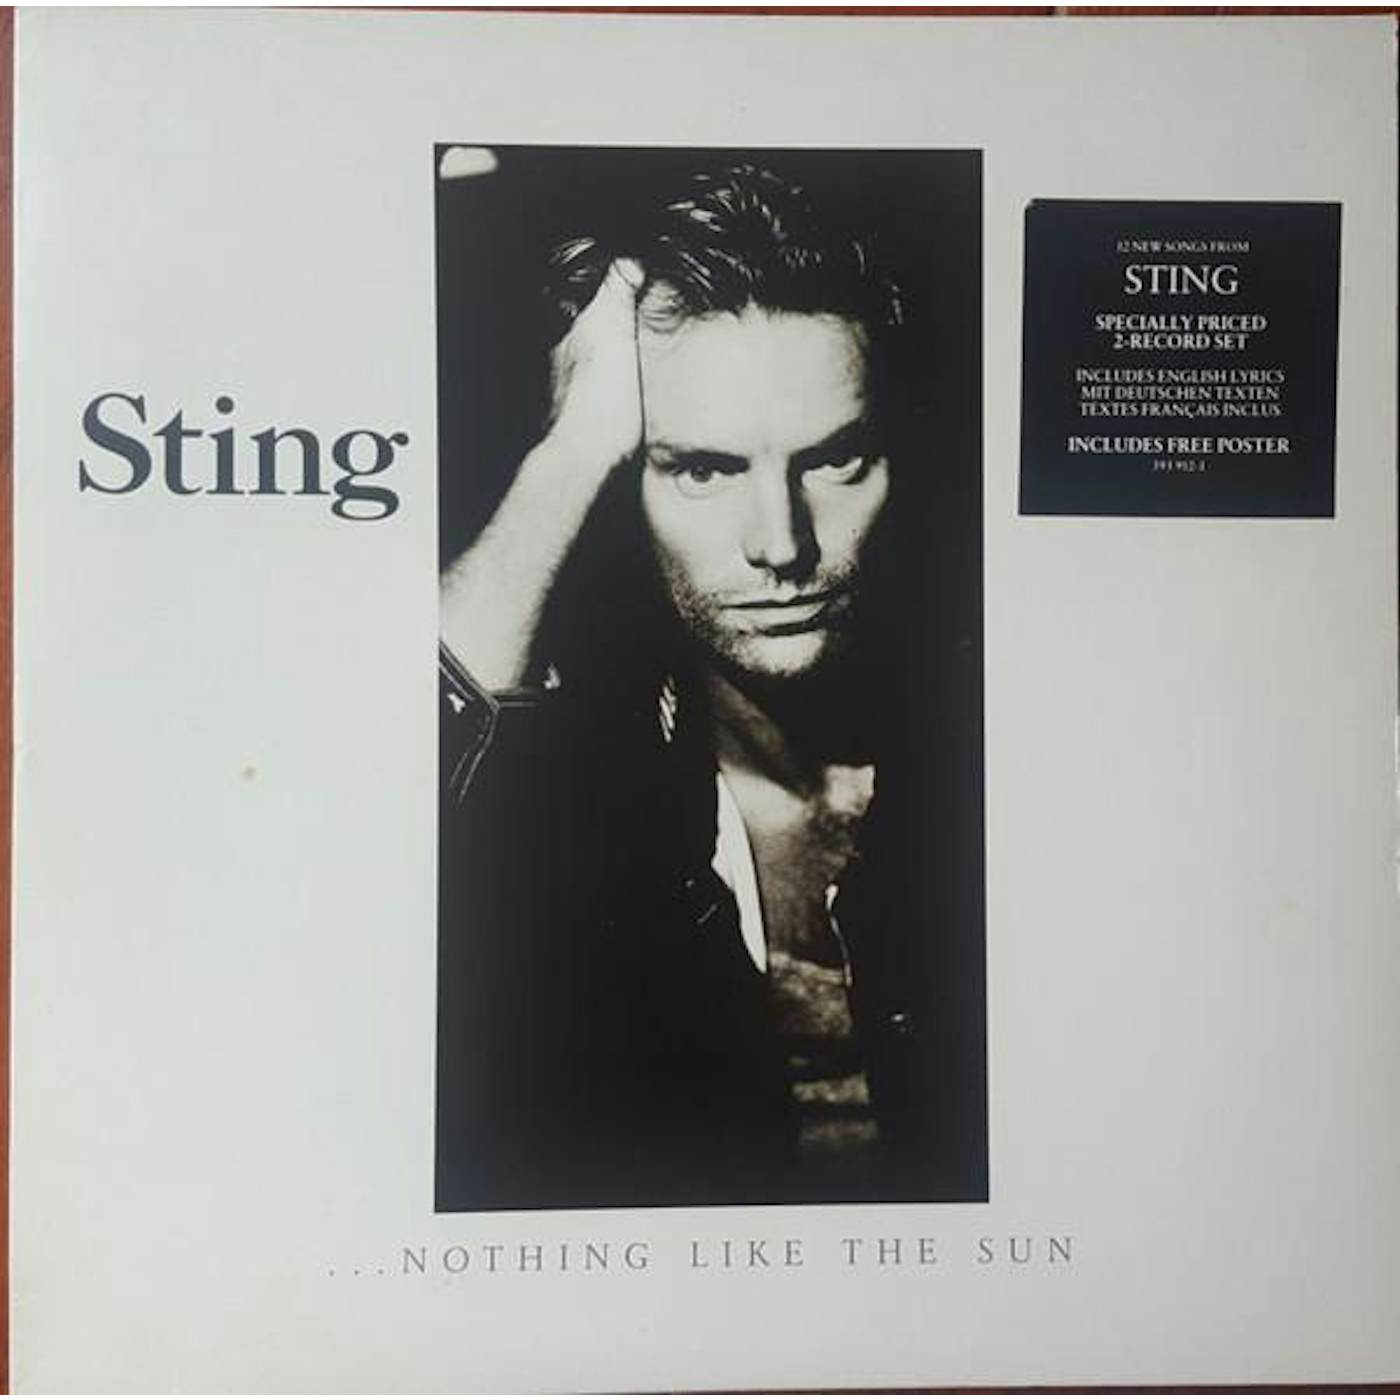 Sting NOTHING LIKE THE SUN Vinyl Record